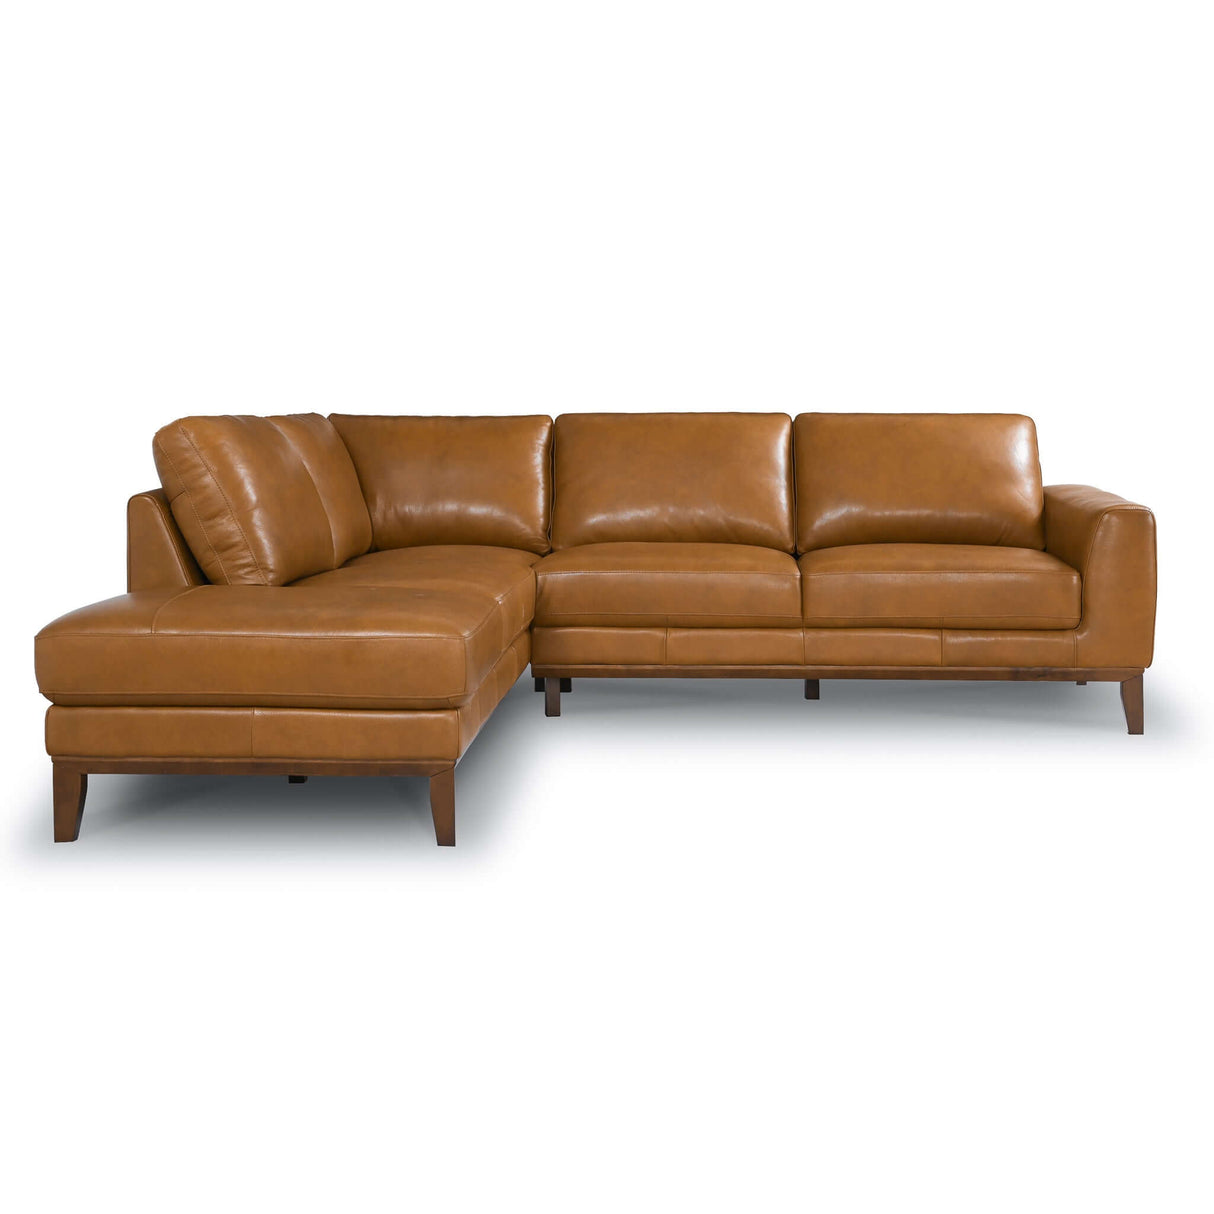 London Mid-Century Modern Leather Sectional Sofa Right-Facing